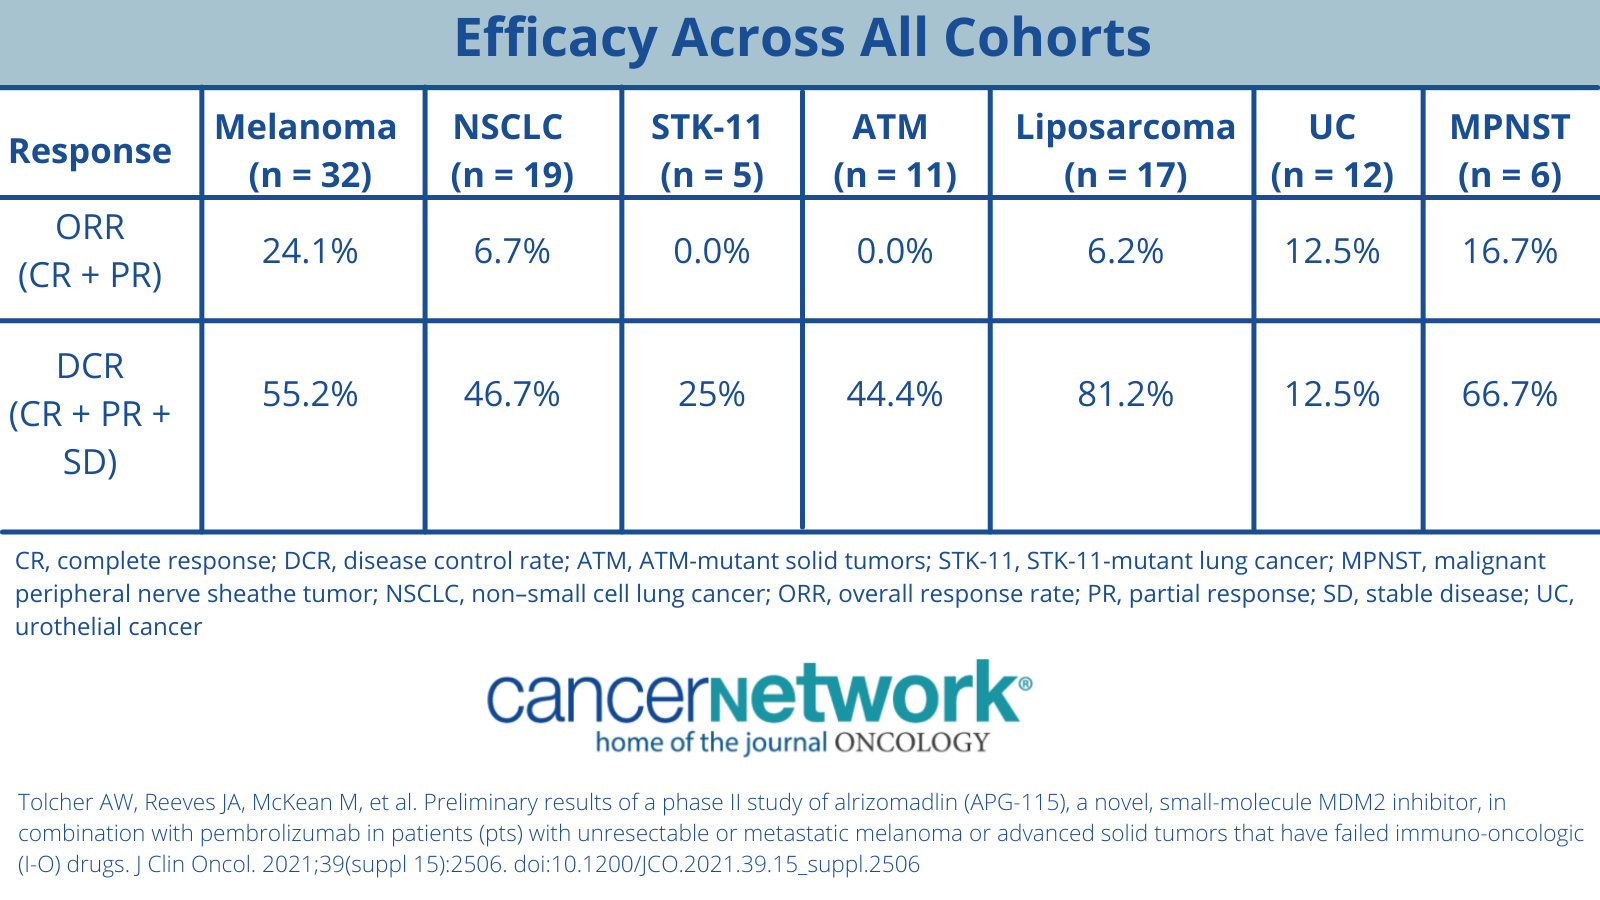 Efficacy of alrizomadlin across all cohorts in the phase 2 APG-115-US-002 trial (NCT03611868).